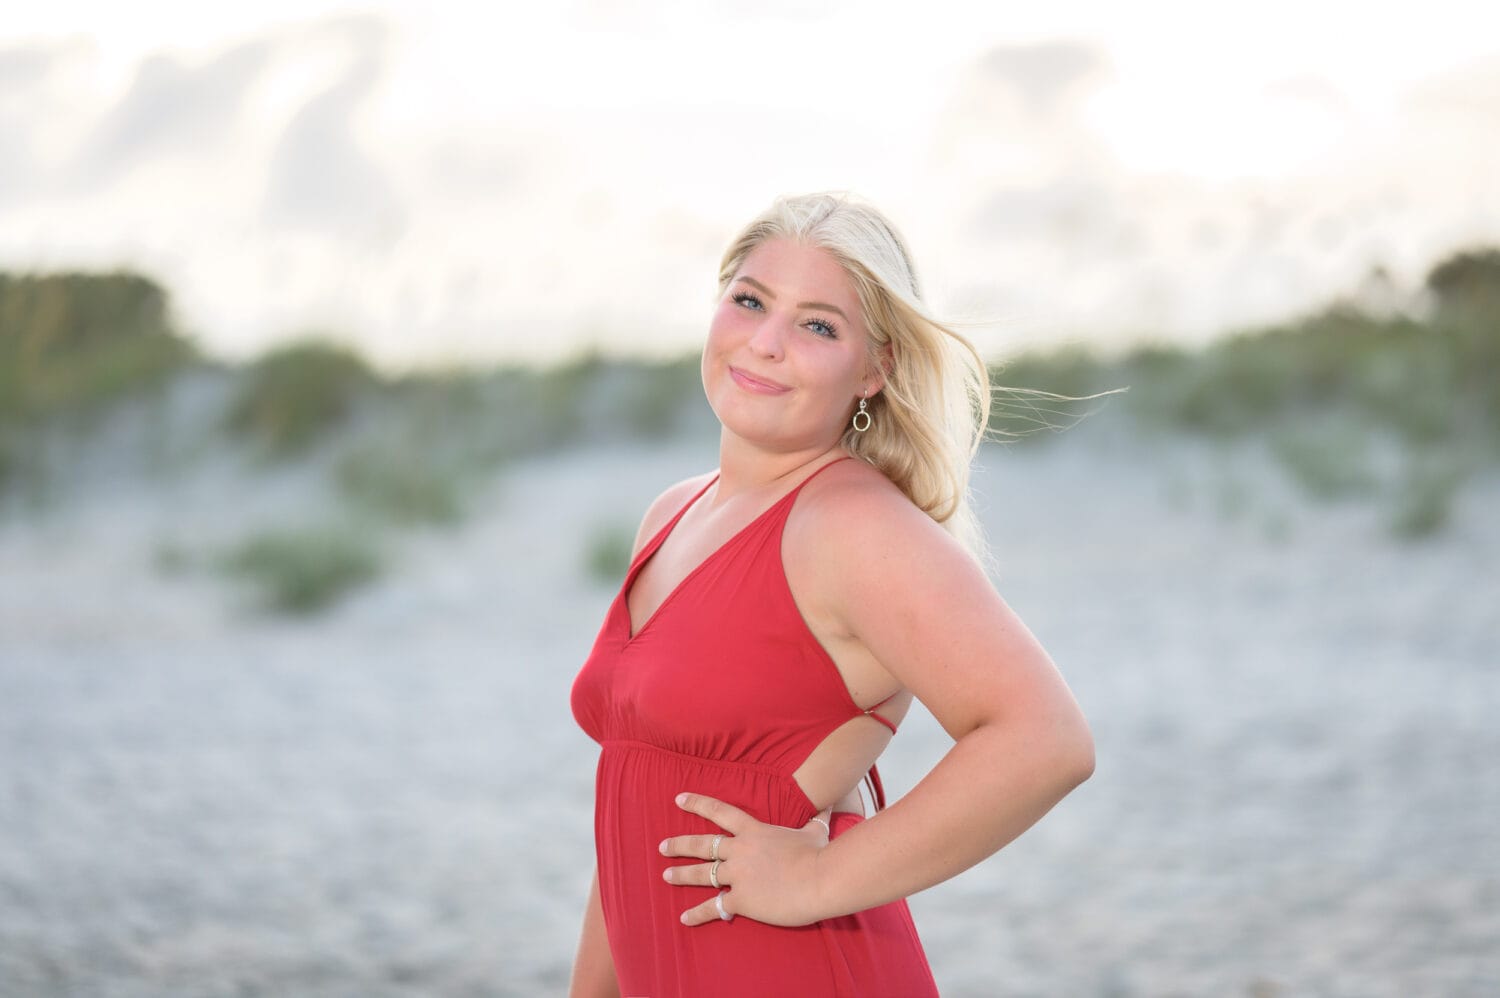 Senior portraits in long red dress in the sunset - Huntington Beach State Park